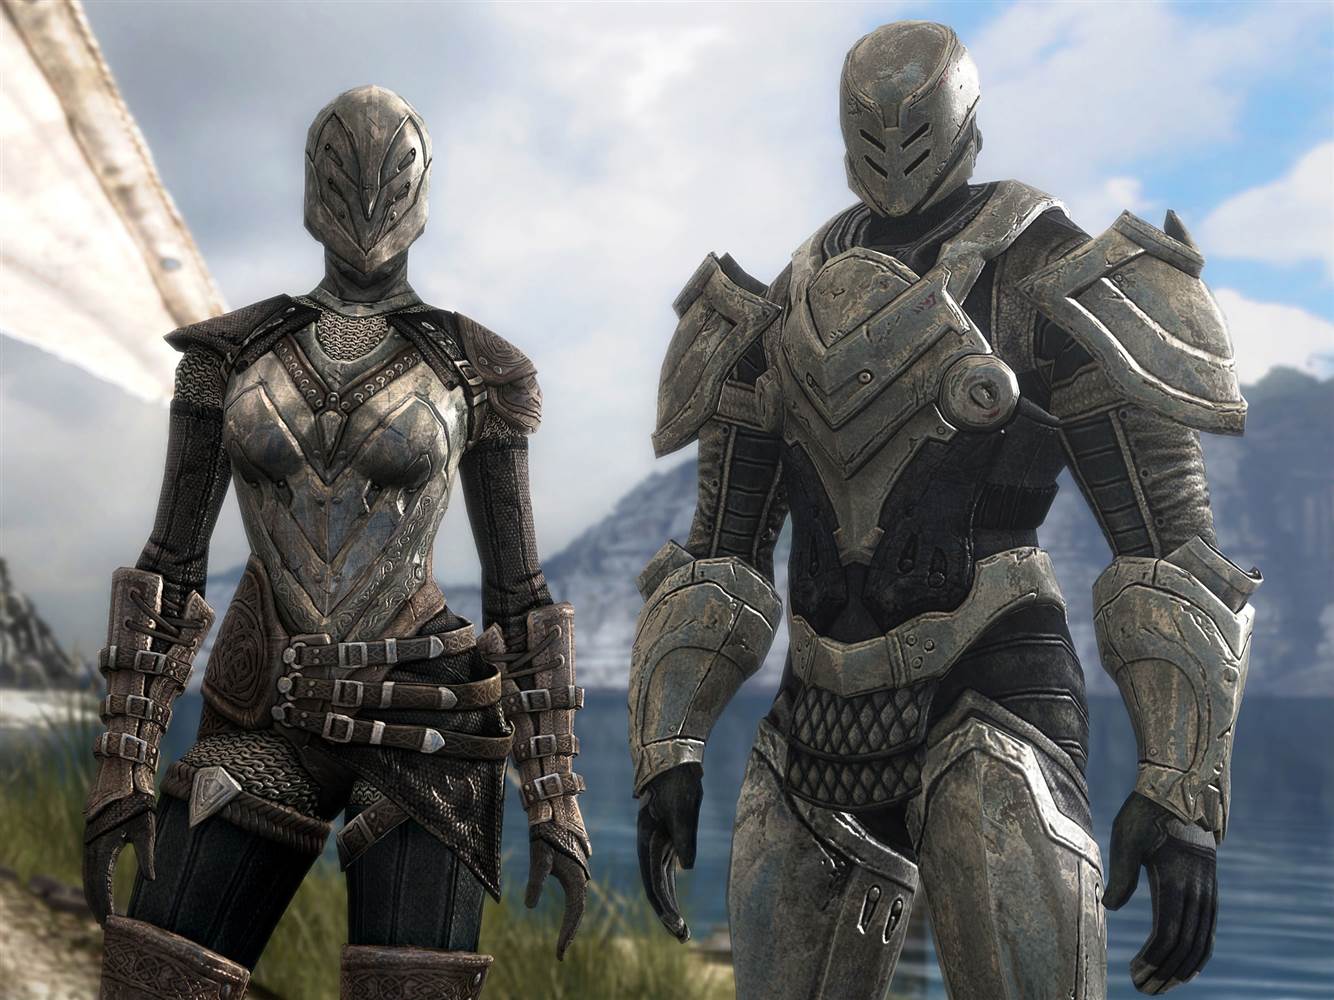 Infinity Blade 3' to launch with iPhone 5S